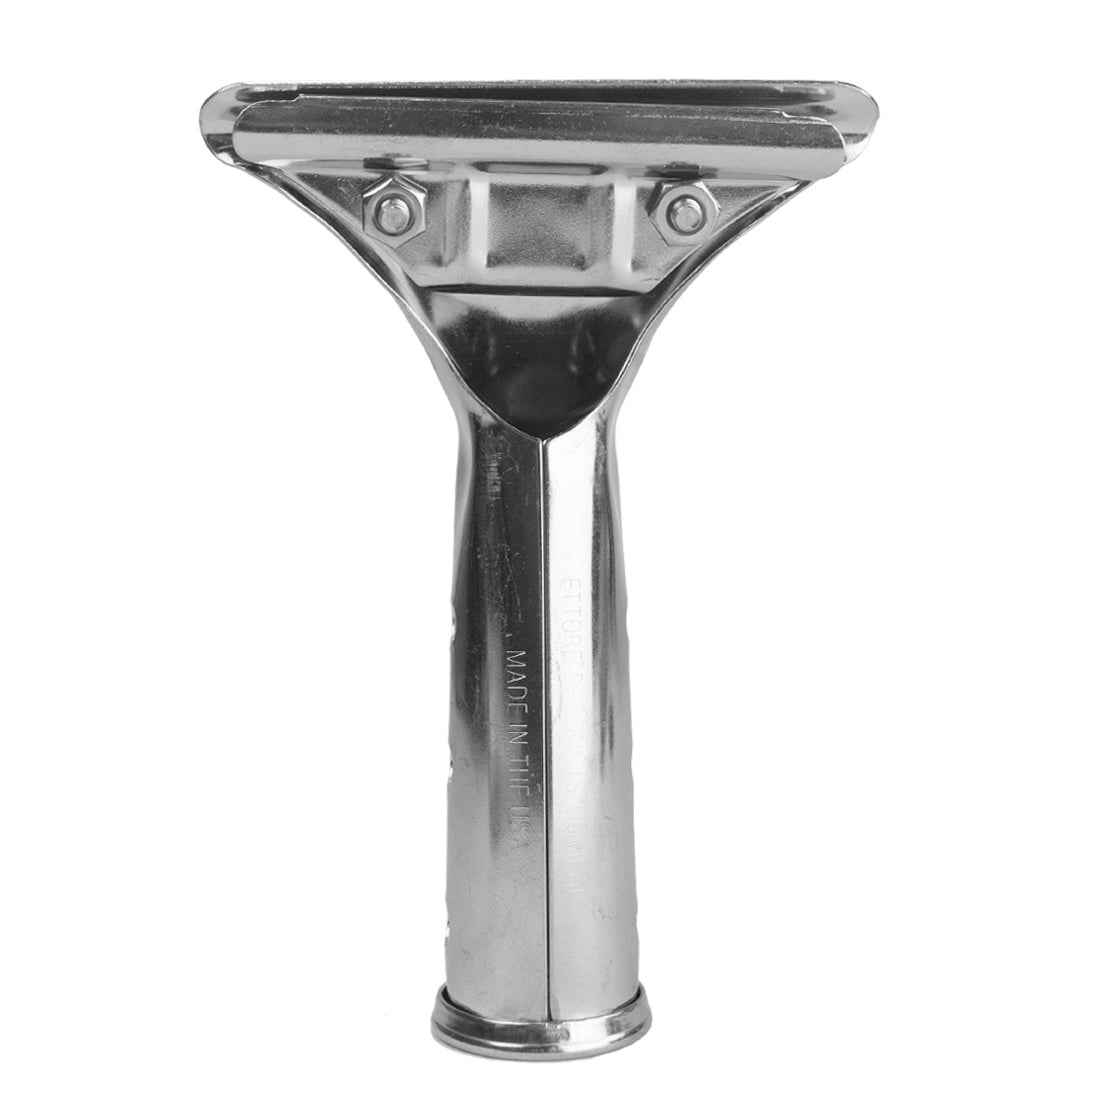 Ettore Complete Stainless Steel with Rubber Grip Super Squeegee